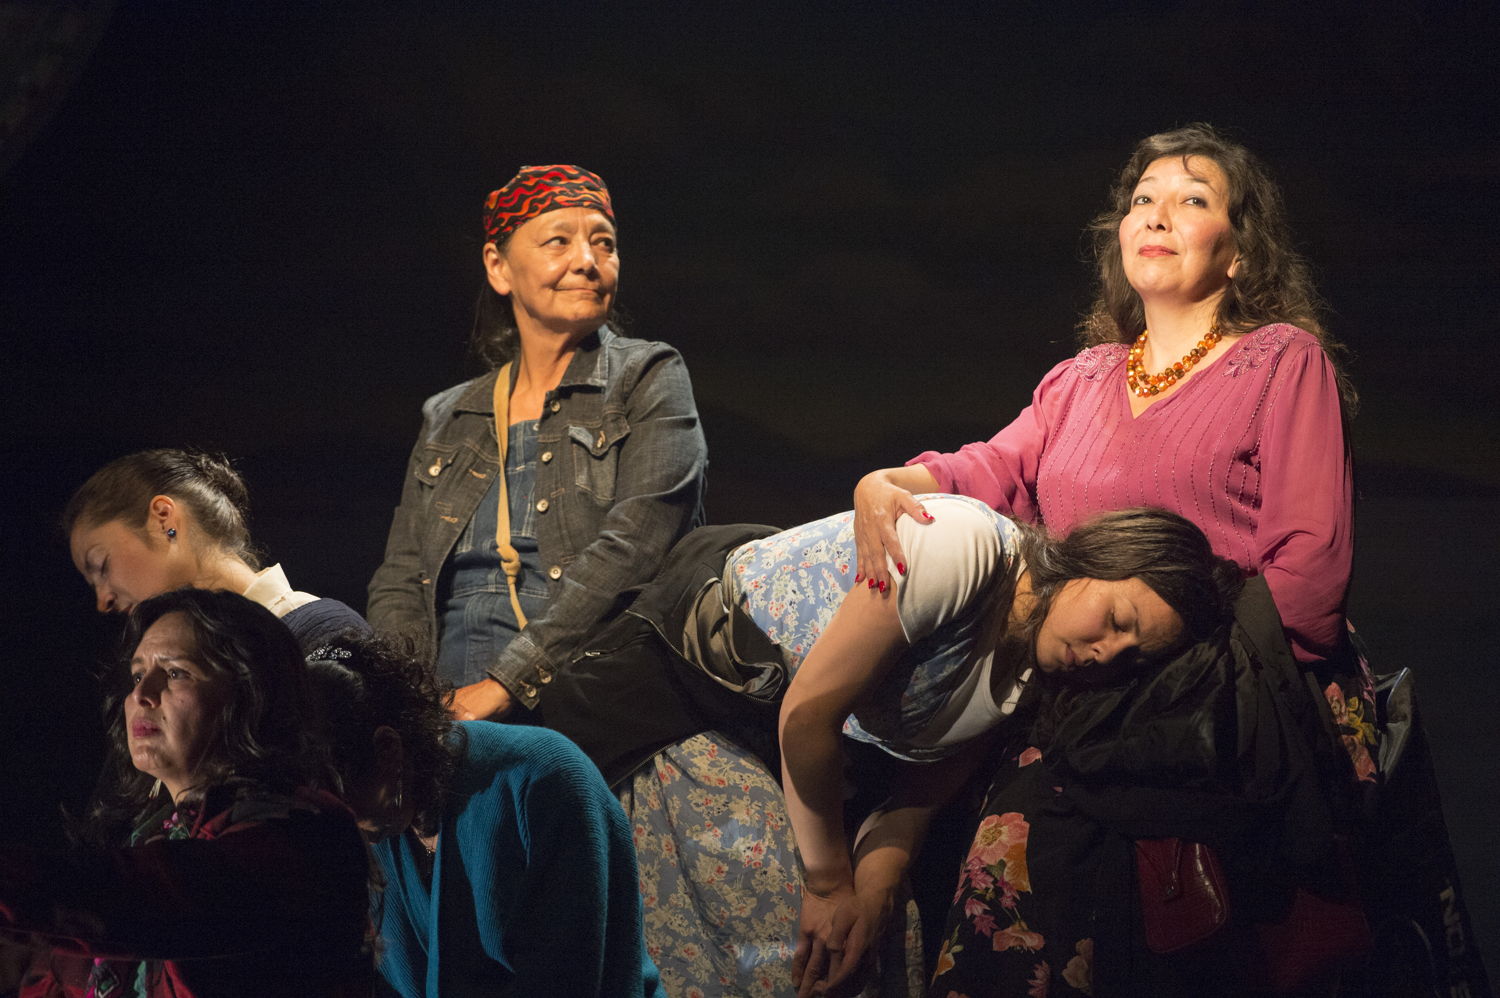 Left to right - Lisa C. Ravensbergen (as Annie Cook / in front), Cheri Maracle (as Veronique St. Pierre / back head down), Tantoo Cardinal (as Pelajia Patchnose), Tiffany Ayalik (as Zhaboonigan Peterson - head in lap), and Tracey Nepinak (as Philomena Moosetail)  in The Rez Sisters by Tomson Highway / Photos by David Cooper / <a href="http://www.belfry.bc.ca/the-rez-sisters/" rel="nofollow">www.belfry.bc.ca/the-rez-sisters/</a>